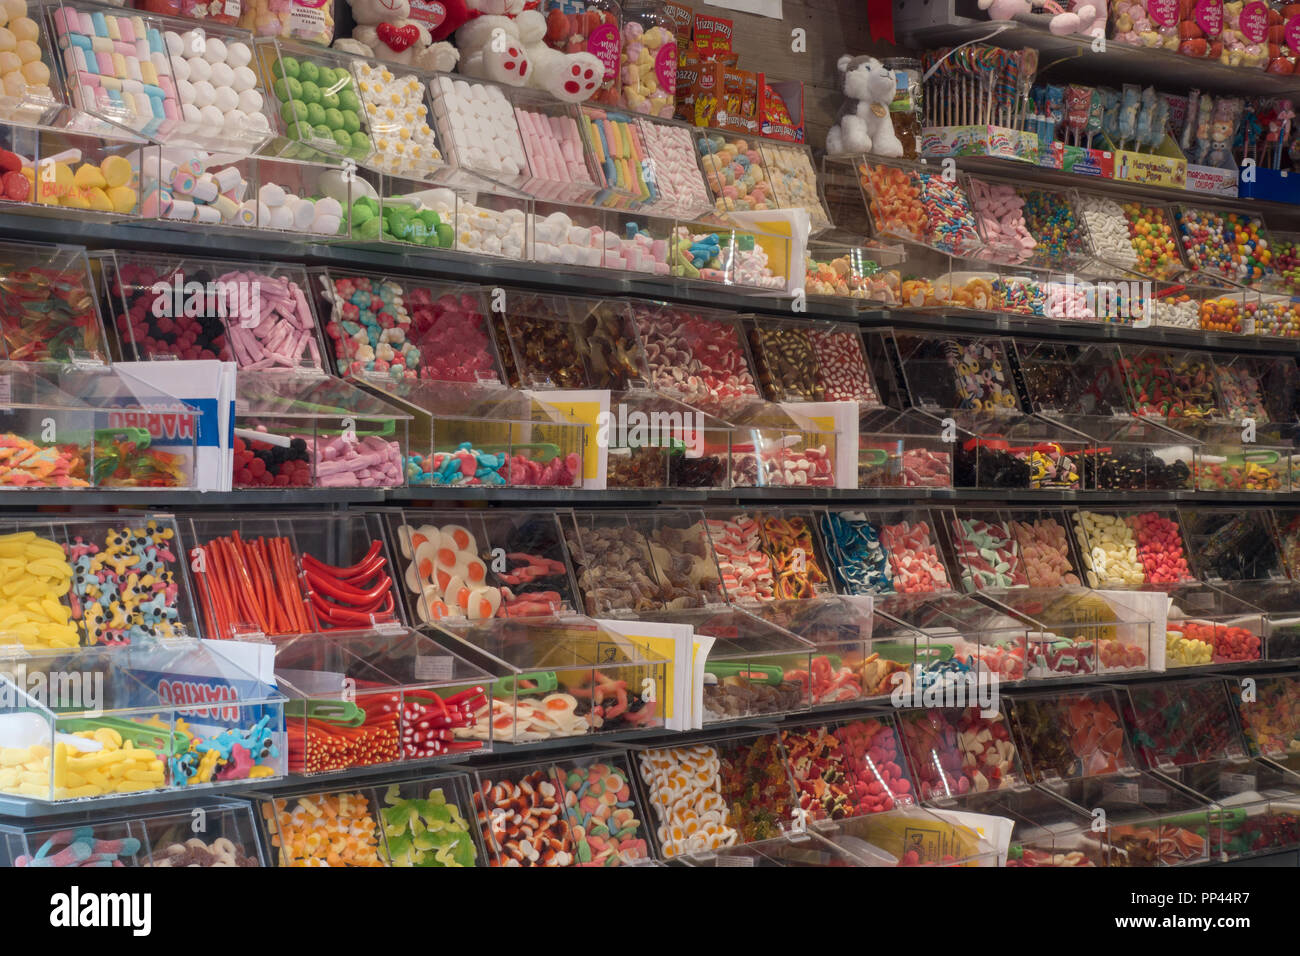 https://c8.alamy.com/comp/PP44R7/display-of-pick-and-mix-sweets-in-shop-sardinia-italy-PP44R7.jpg